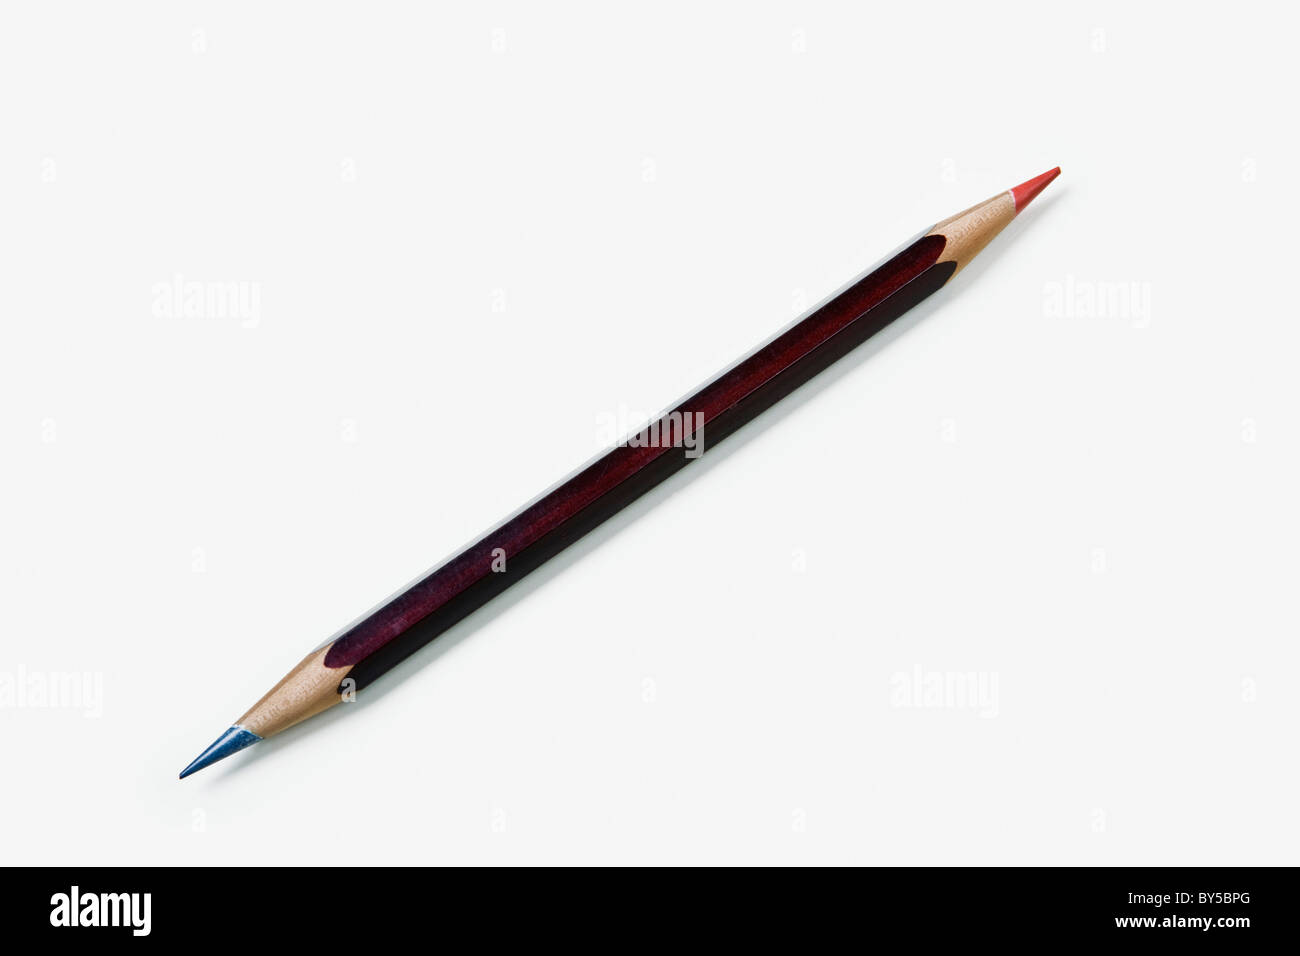 A double ended colored pencil Stock Photo